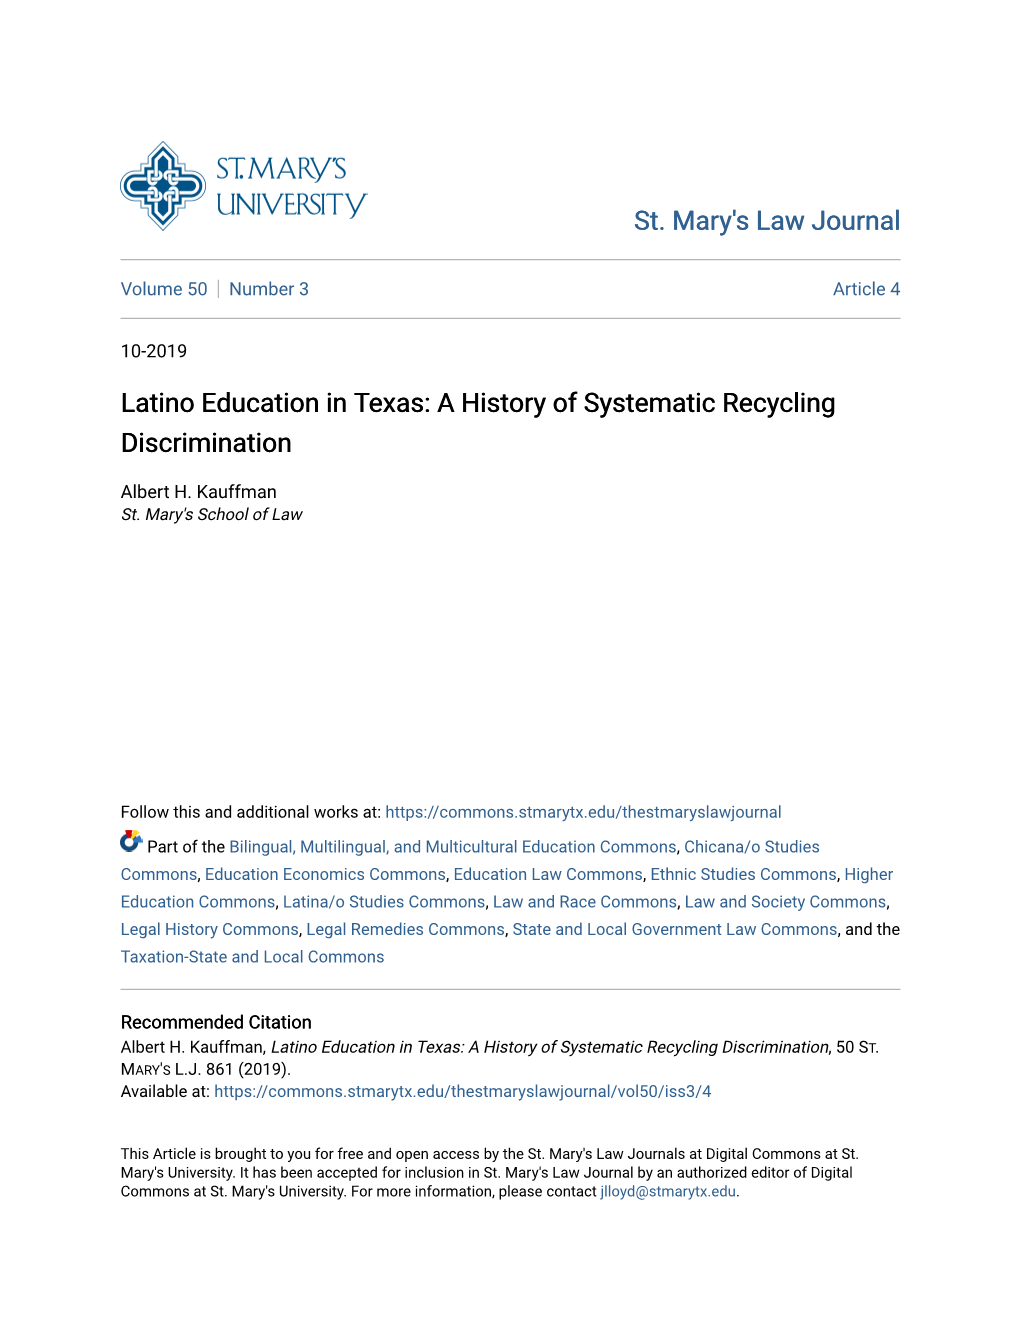 Latino Education in Texas: a History of Systematic Recycling Discrimination